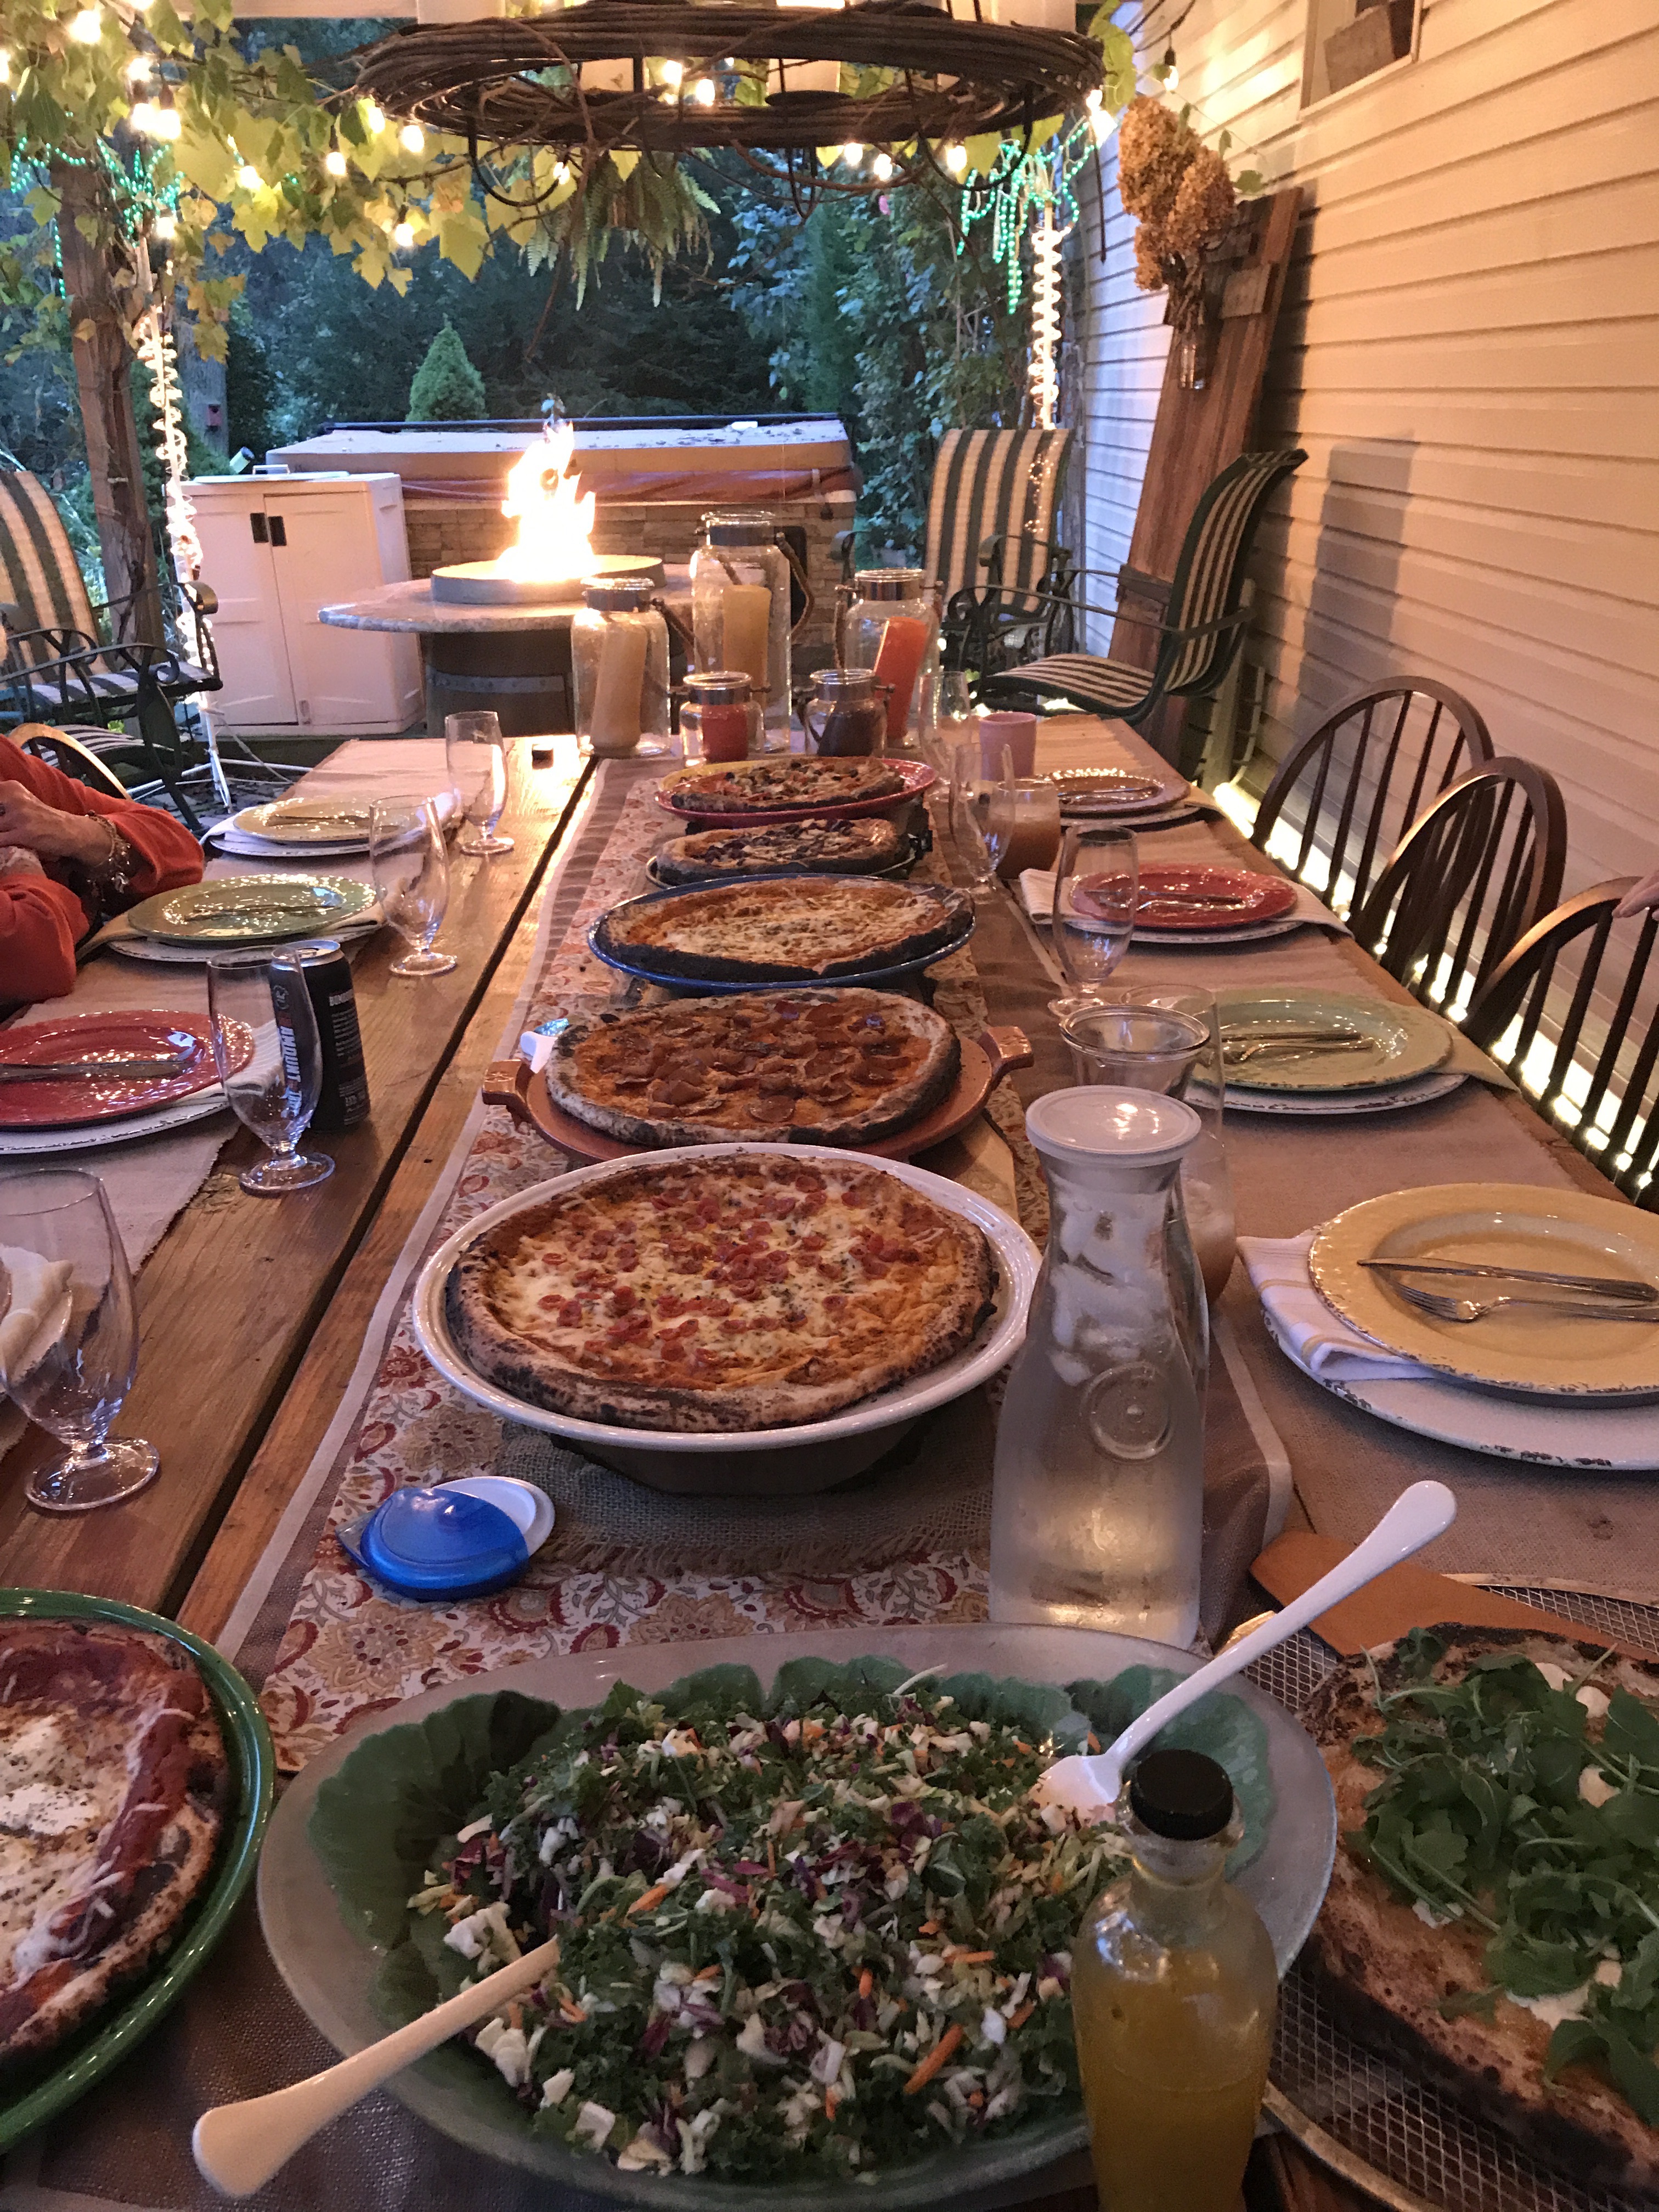 Rustic Pizza Party and Recipes - 5 Pizza Recipes - Outdoor Fall Party - Pottery Barn Party - Fall Party Theme - Pizza Party